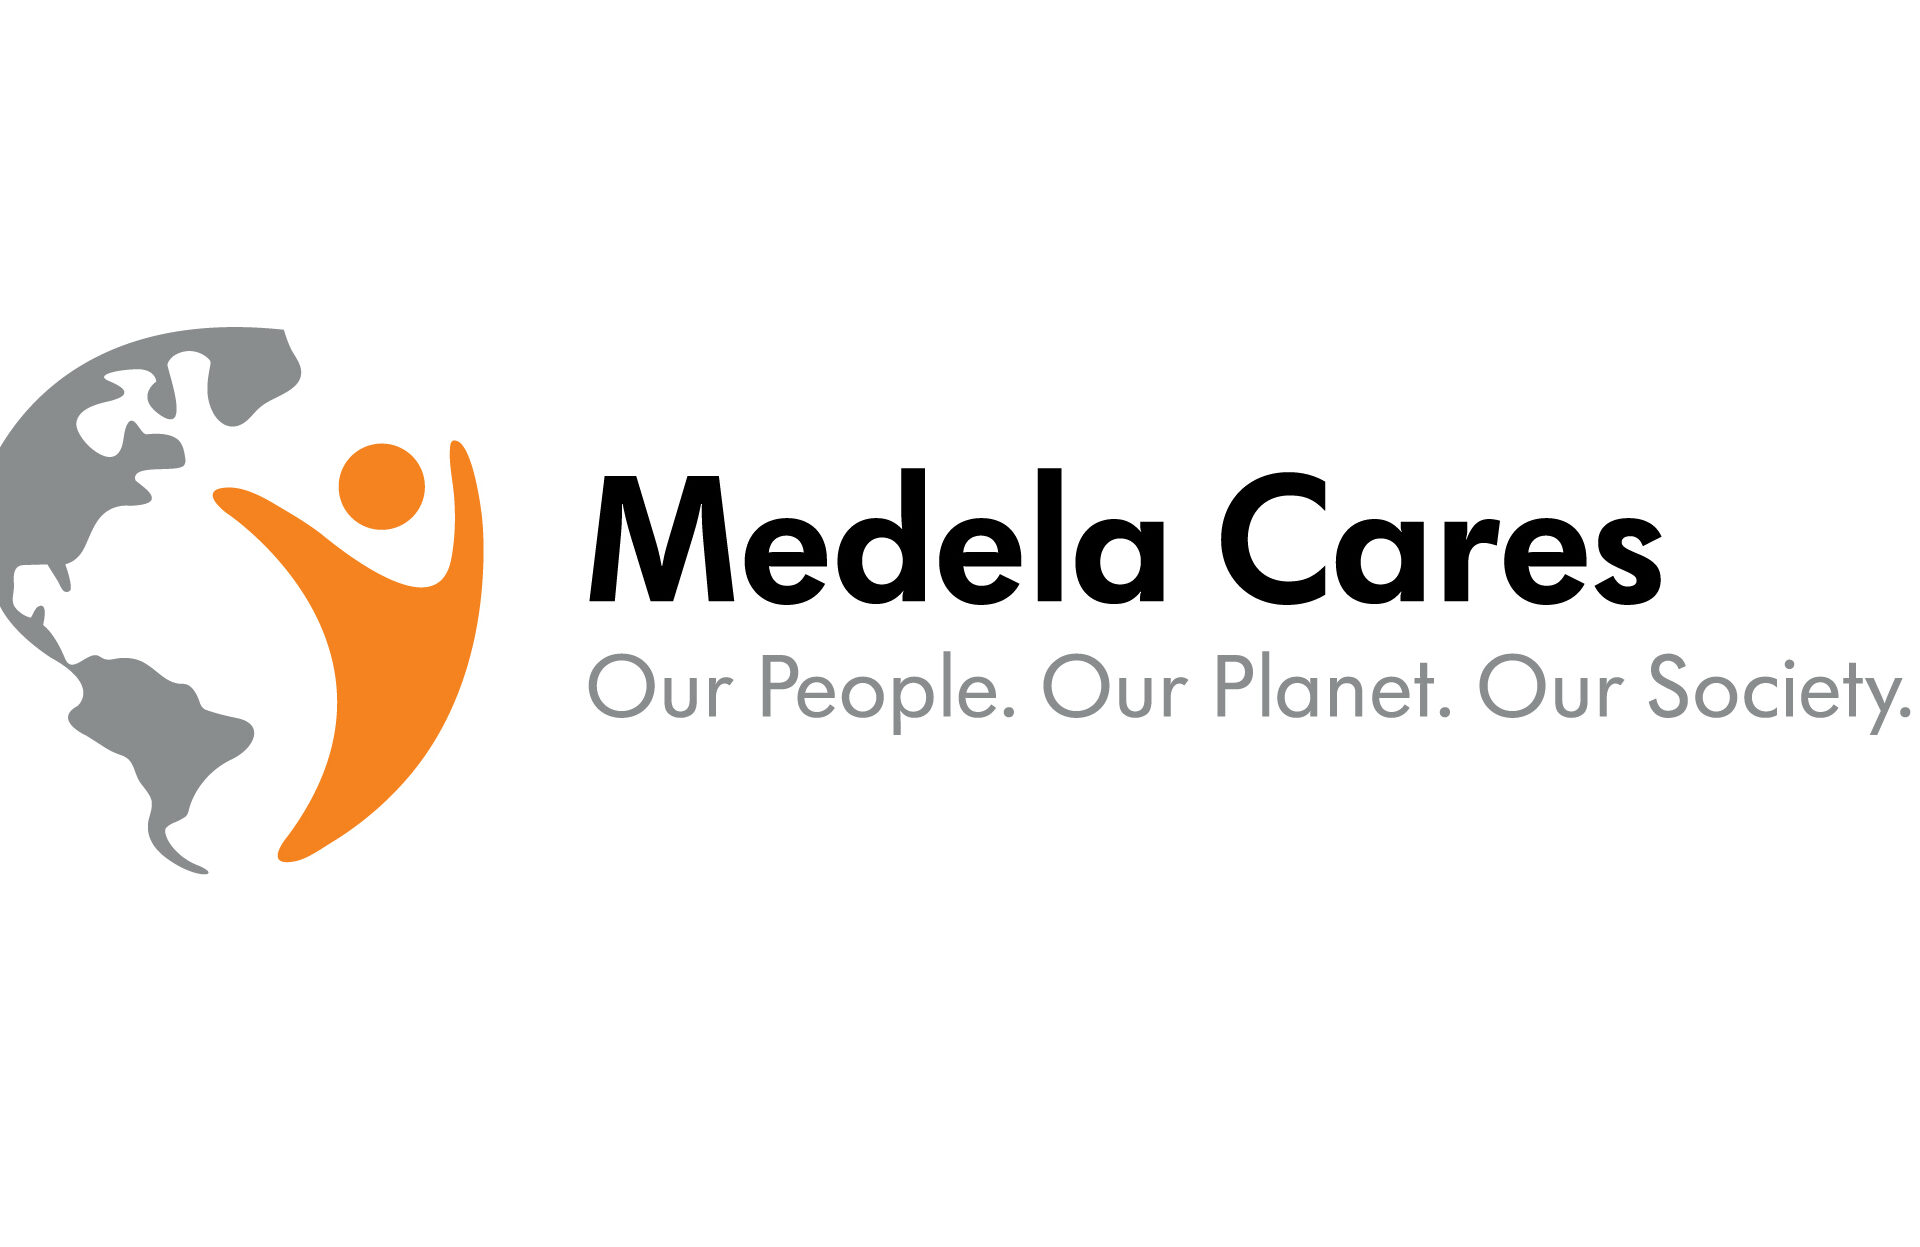 Medela Images :: Photos, videos, logos, illustrations and branding